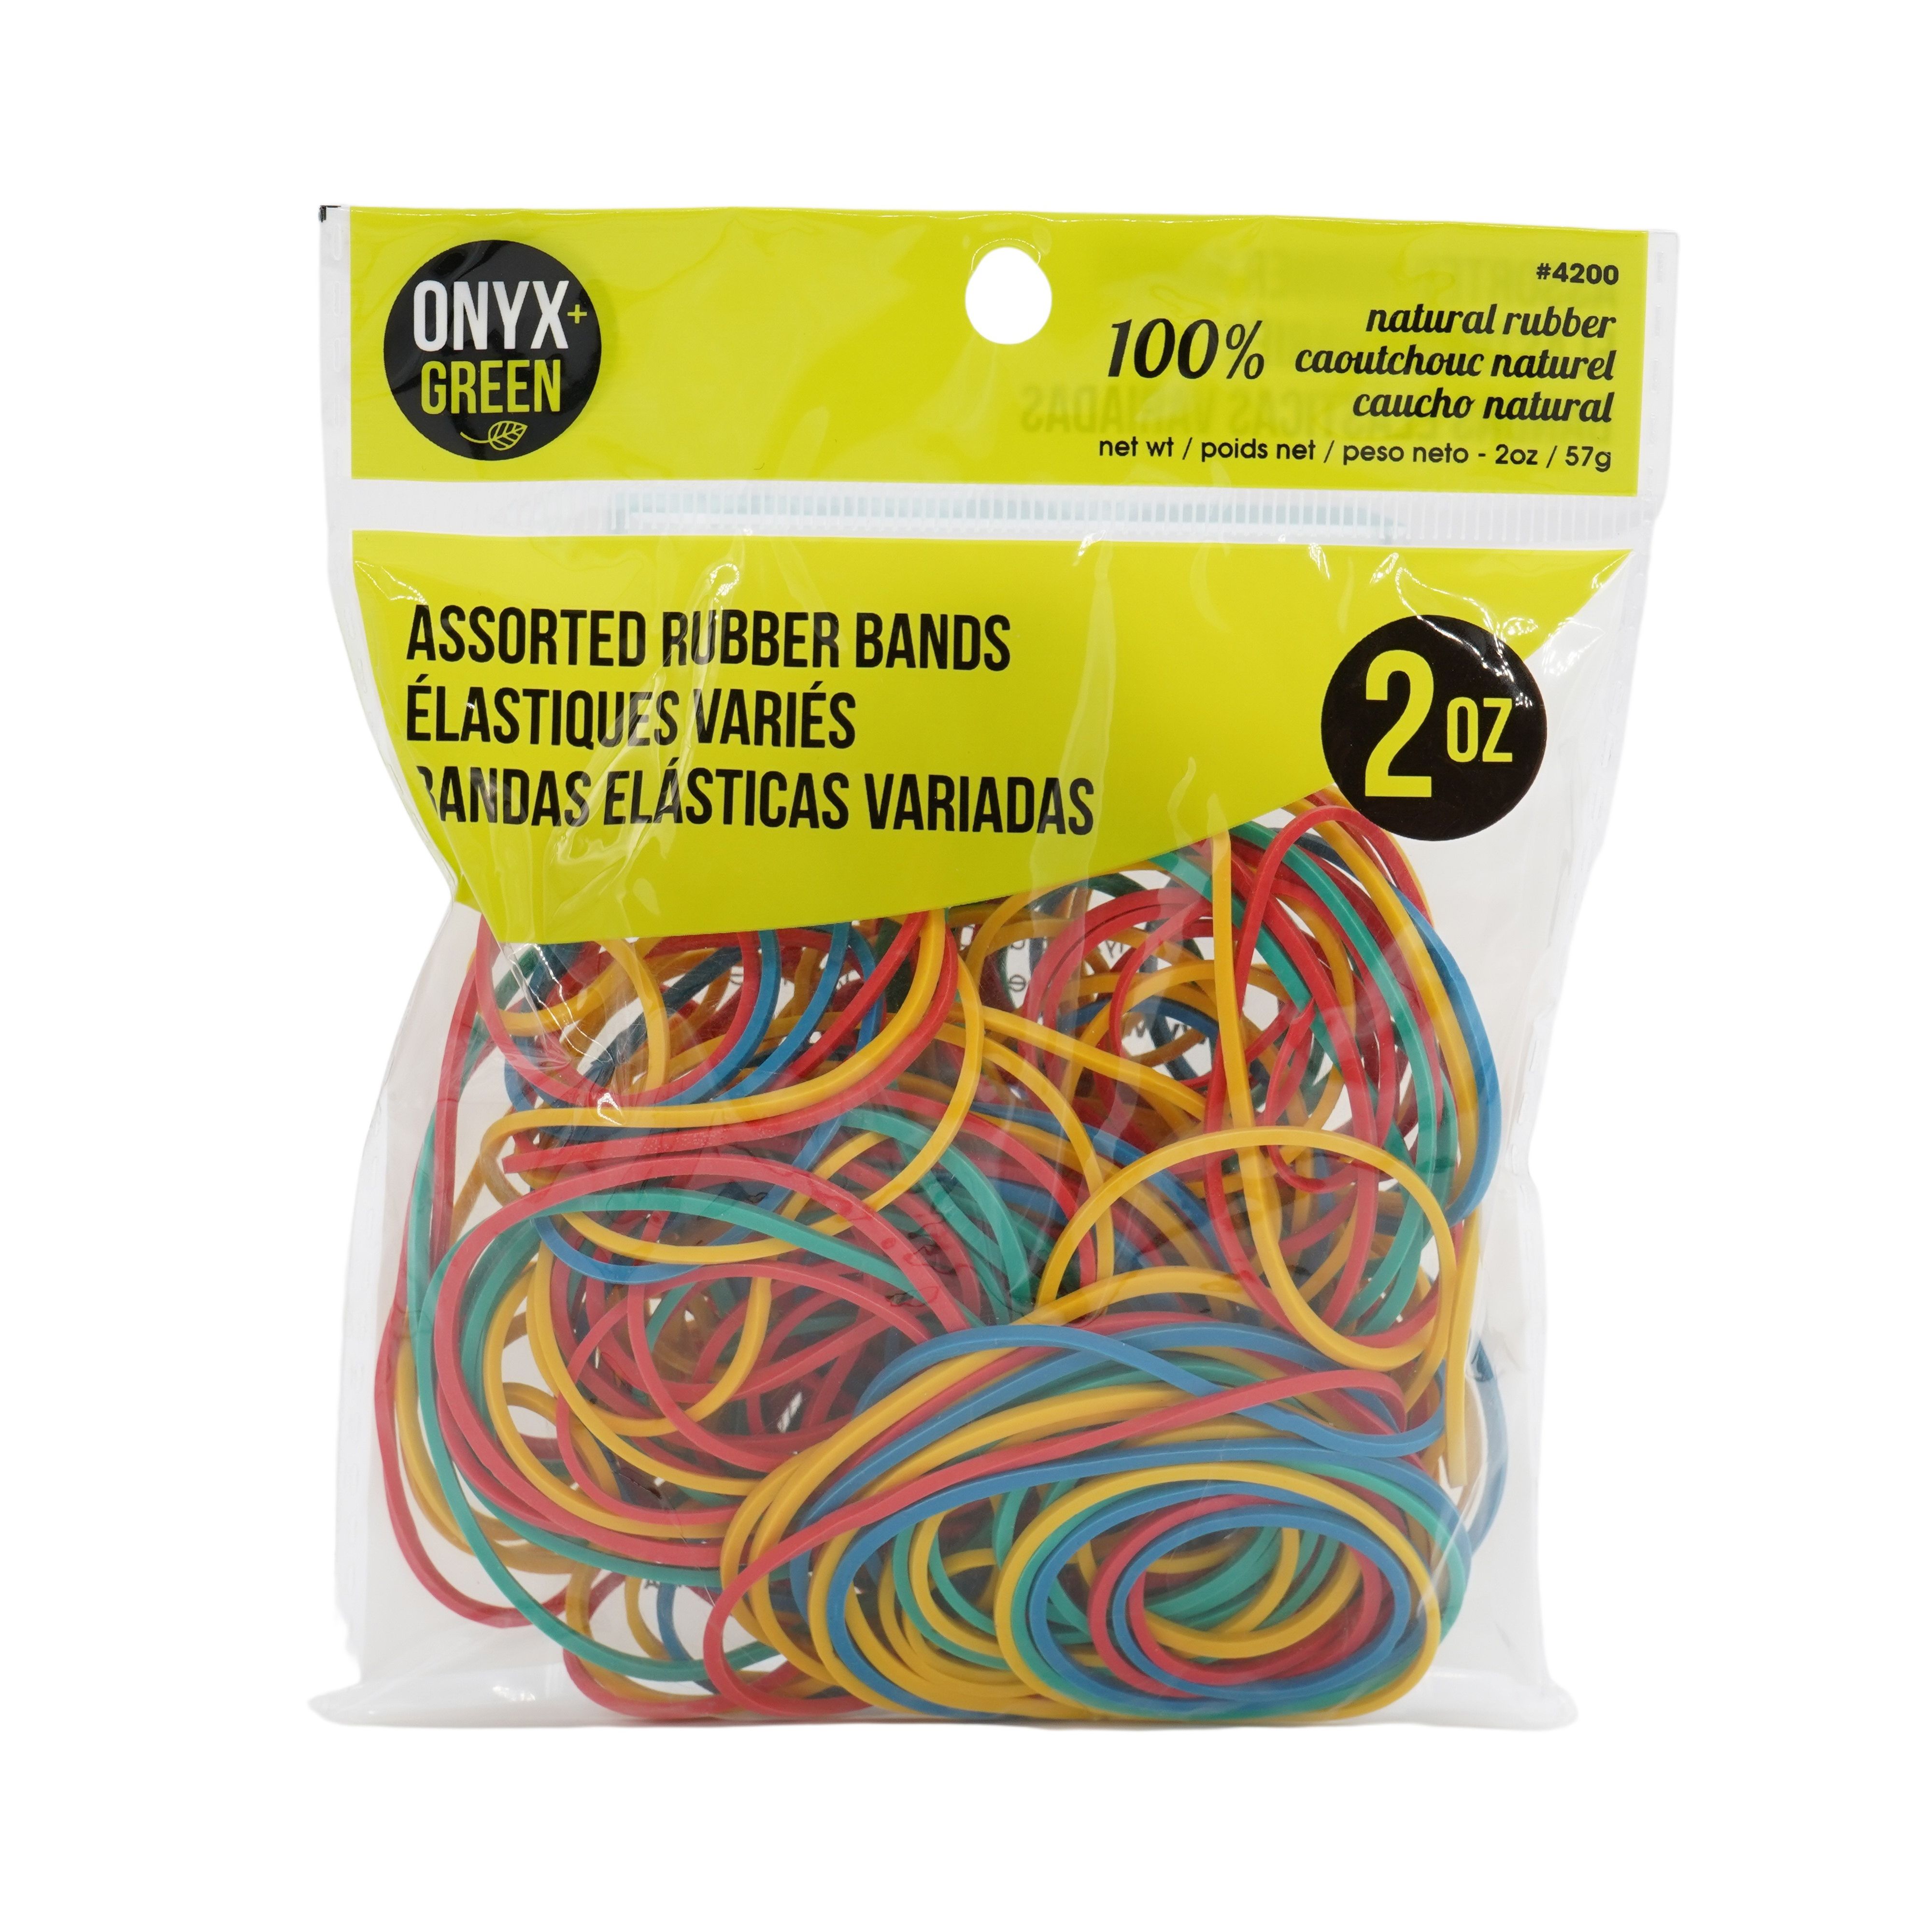 Onyx & Green 100% Natural Assorted Rubber Bands, 57g